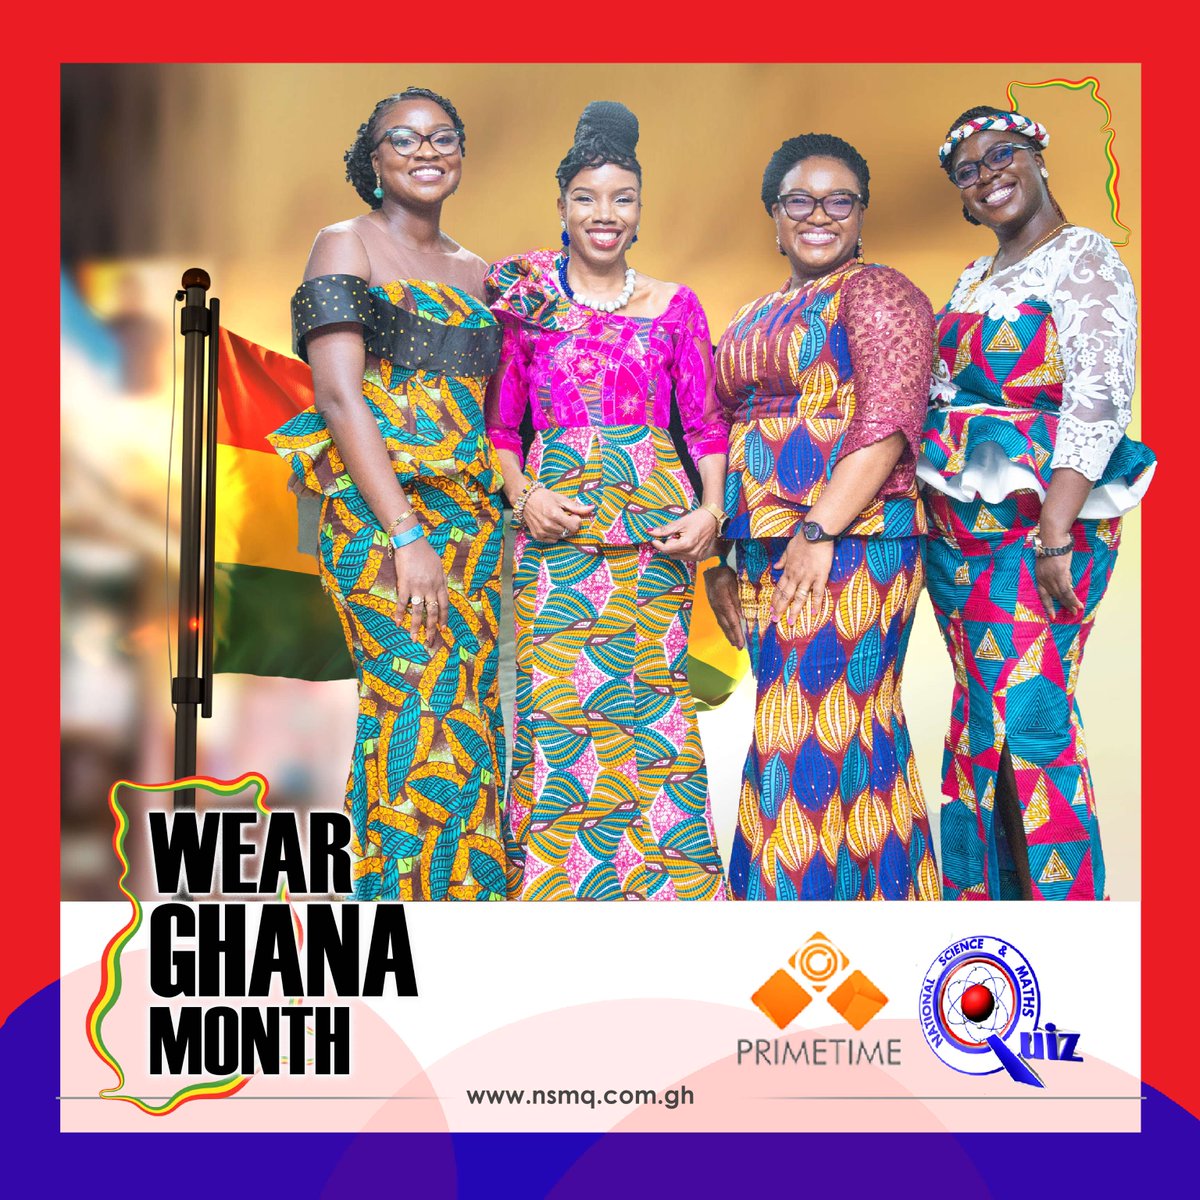 Celebrate Wear Ghana Month with us! Check out our Quiz Mistresses rocking their stunning African Wear. It's your turn now! Let's see you in your favourite African wear💃 #Primetime #WearGhanaMonth